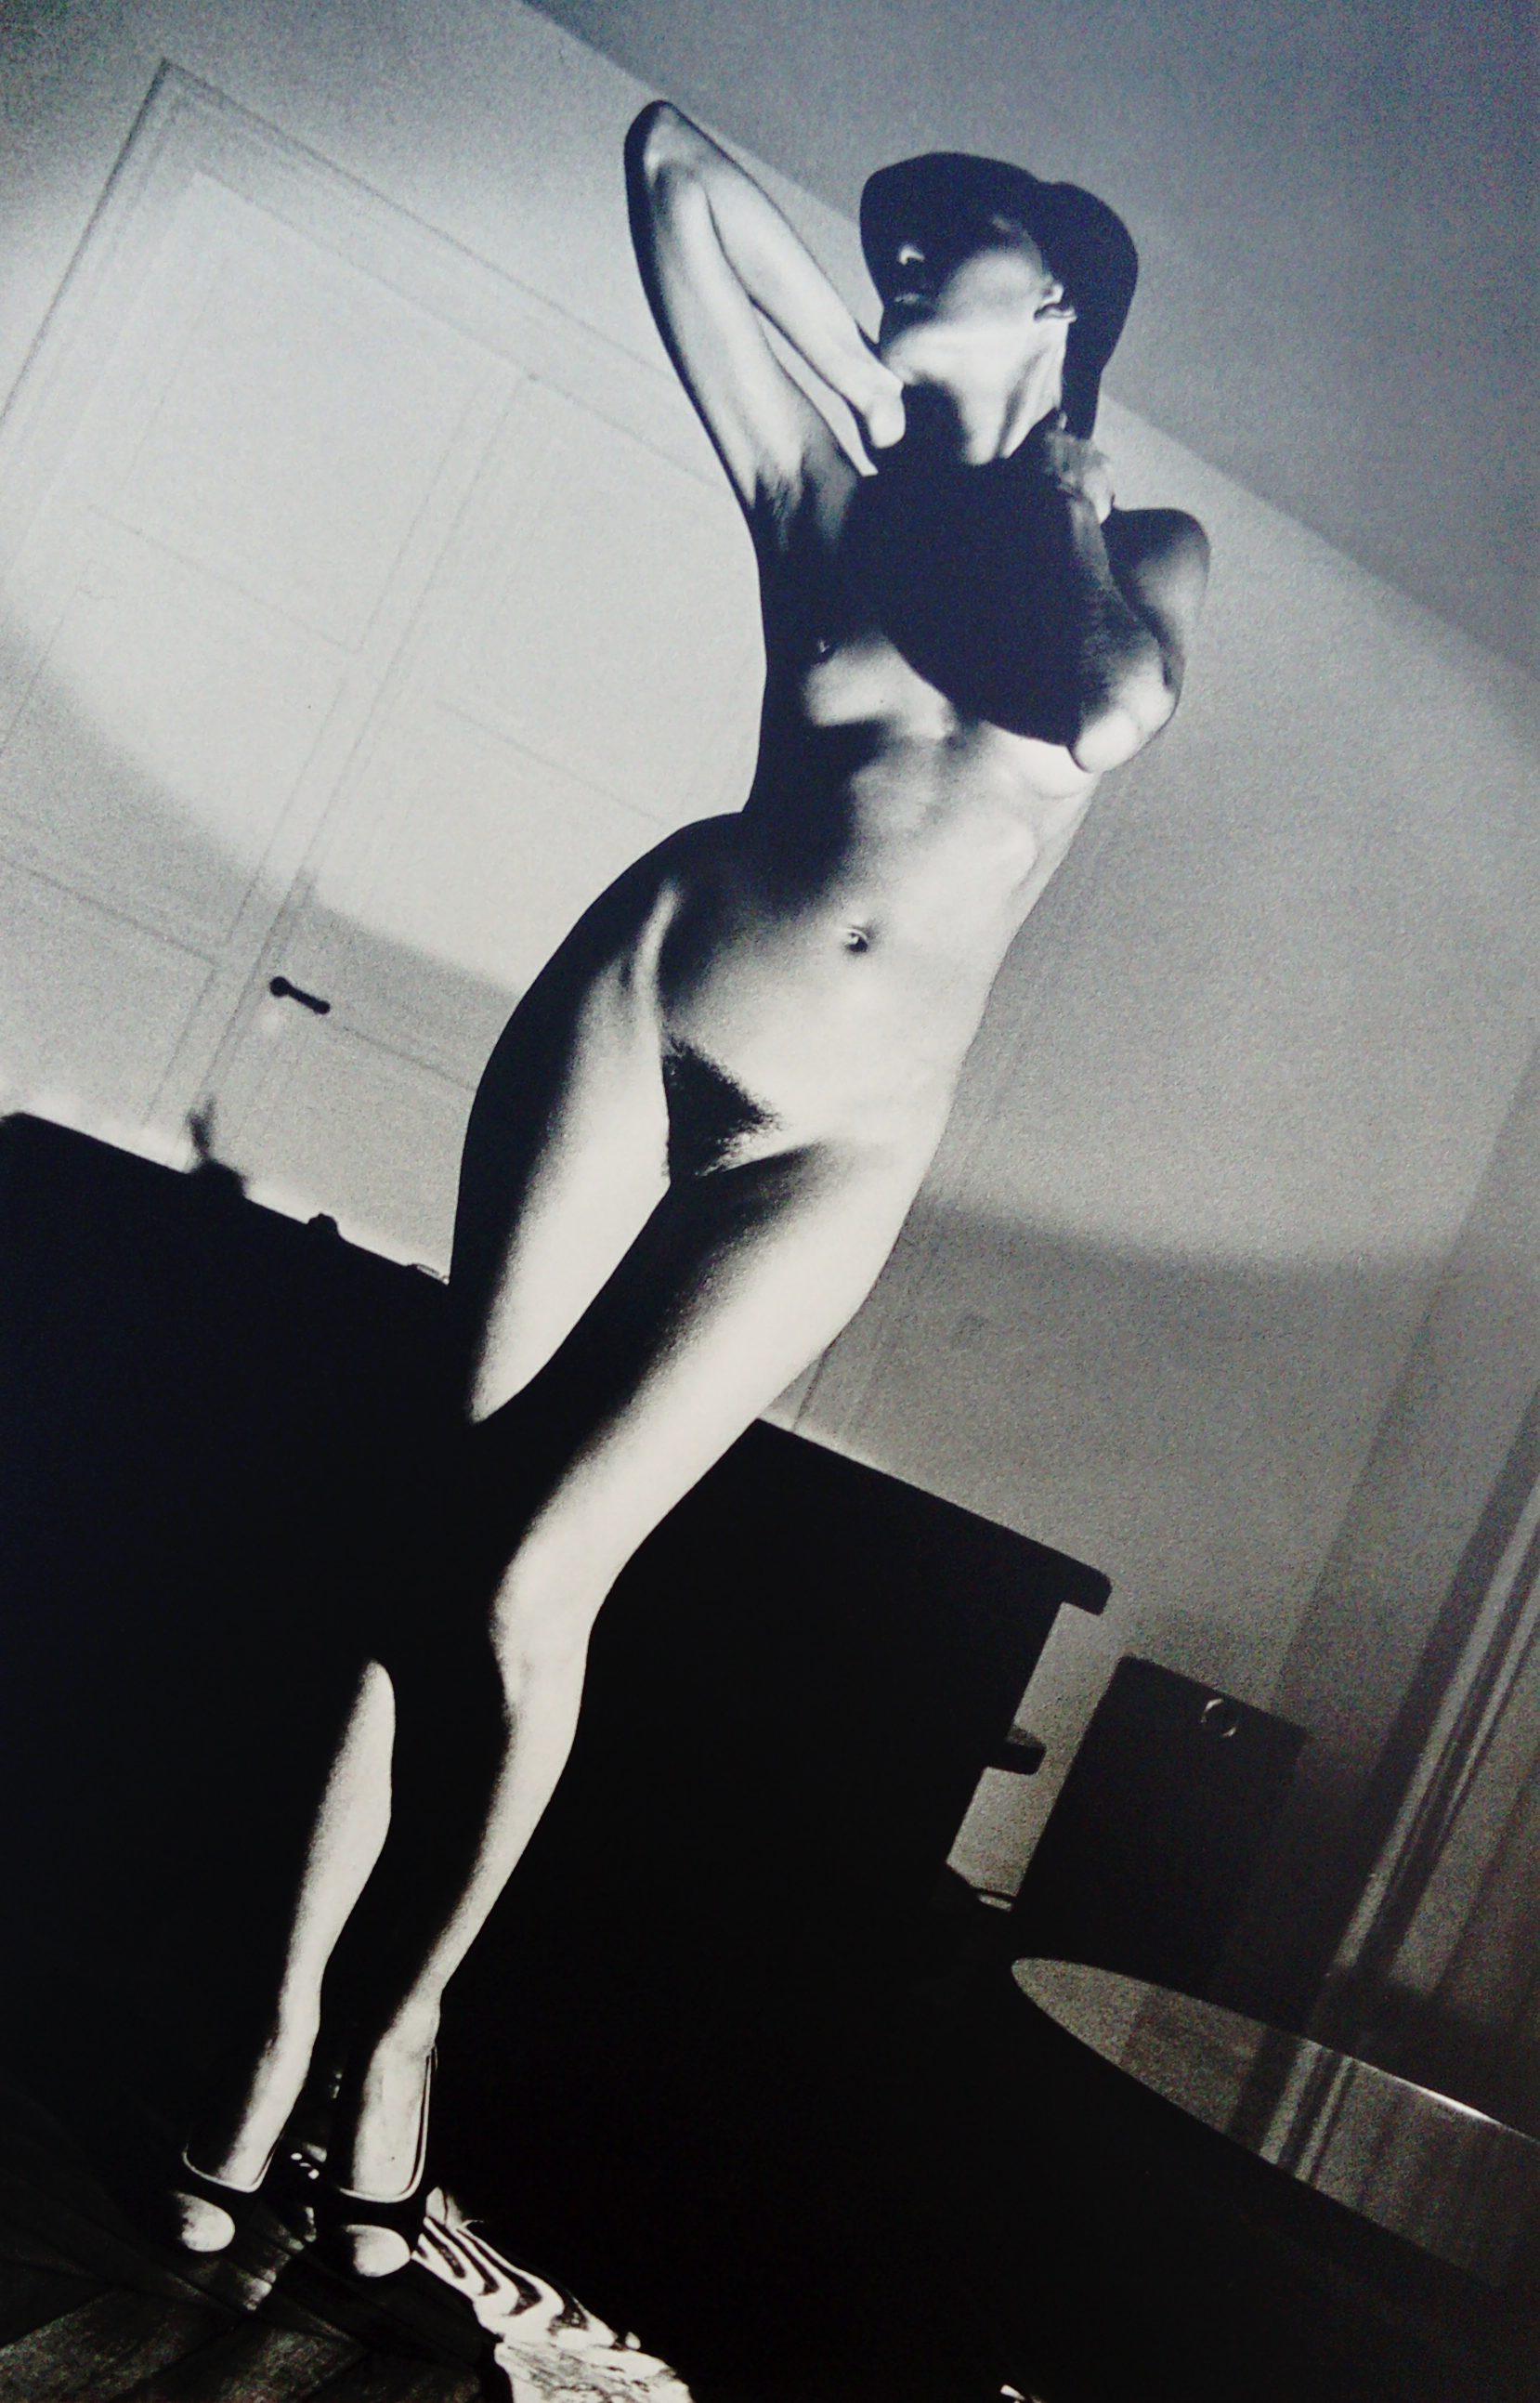 Helmut Newton Black and White Photograph - In my apartment